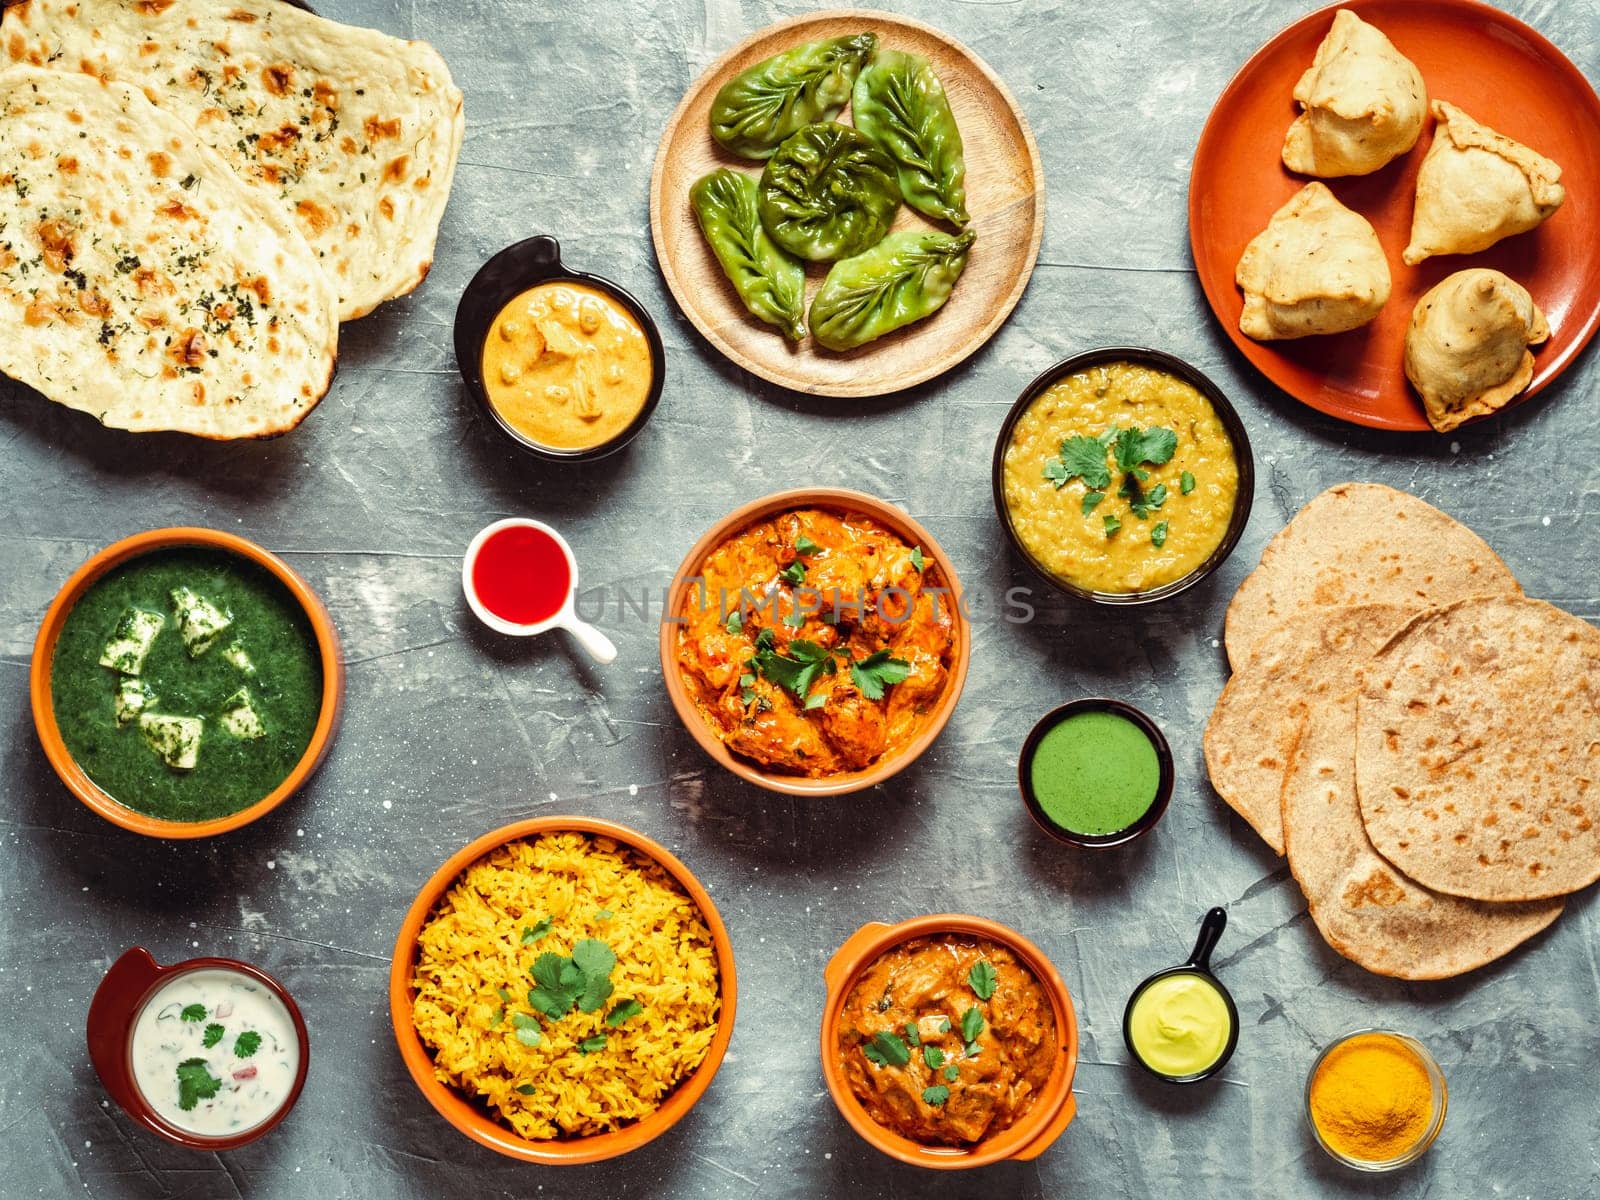 Indian cuisine dishes: tikka masala, dal, paneer, samosa, chapati, chutney, spices. Indian food on gray background. Assortment indian meal top view or flat lay.